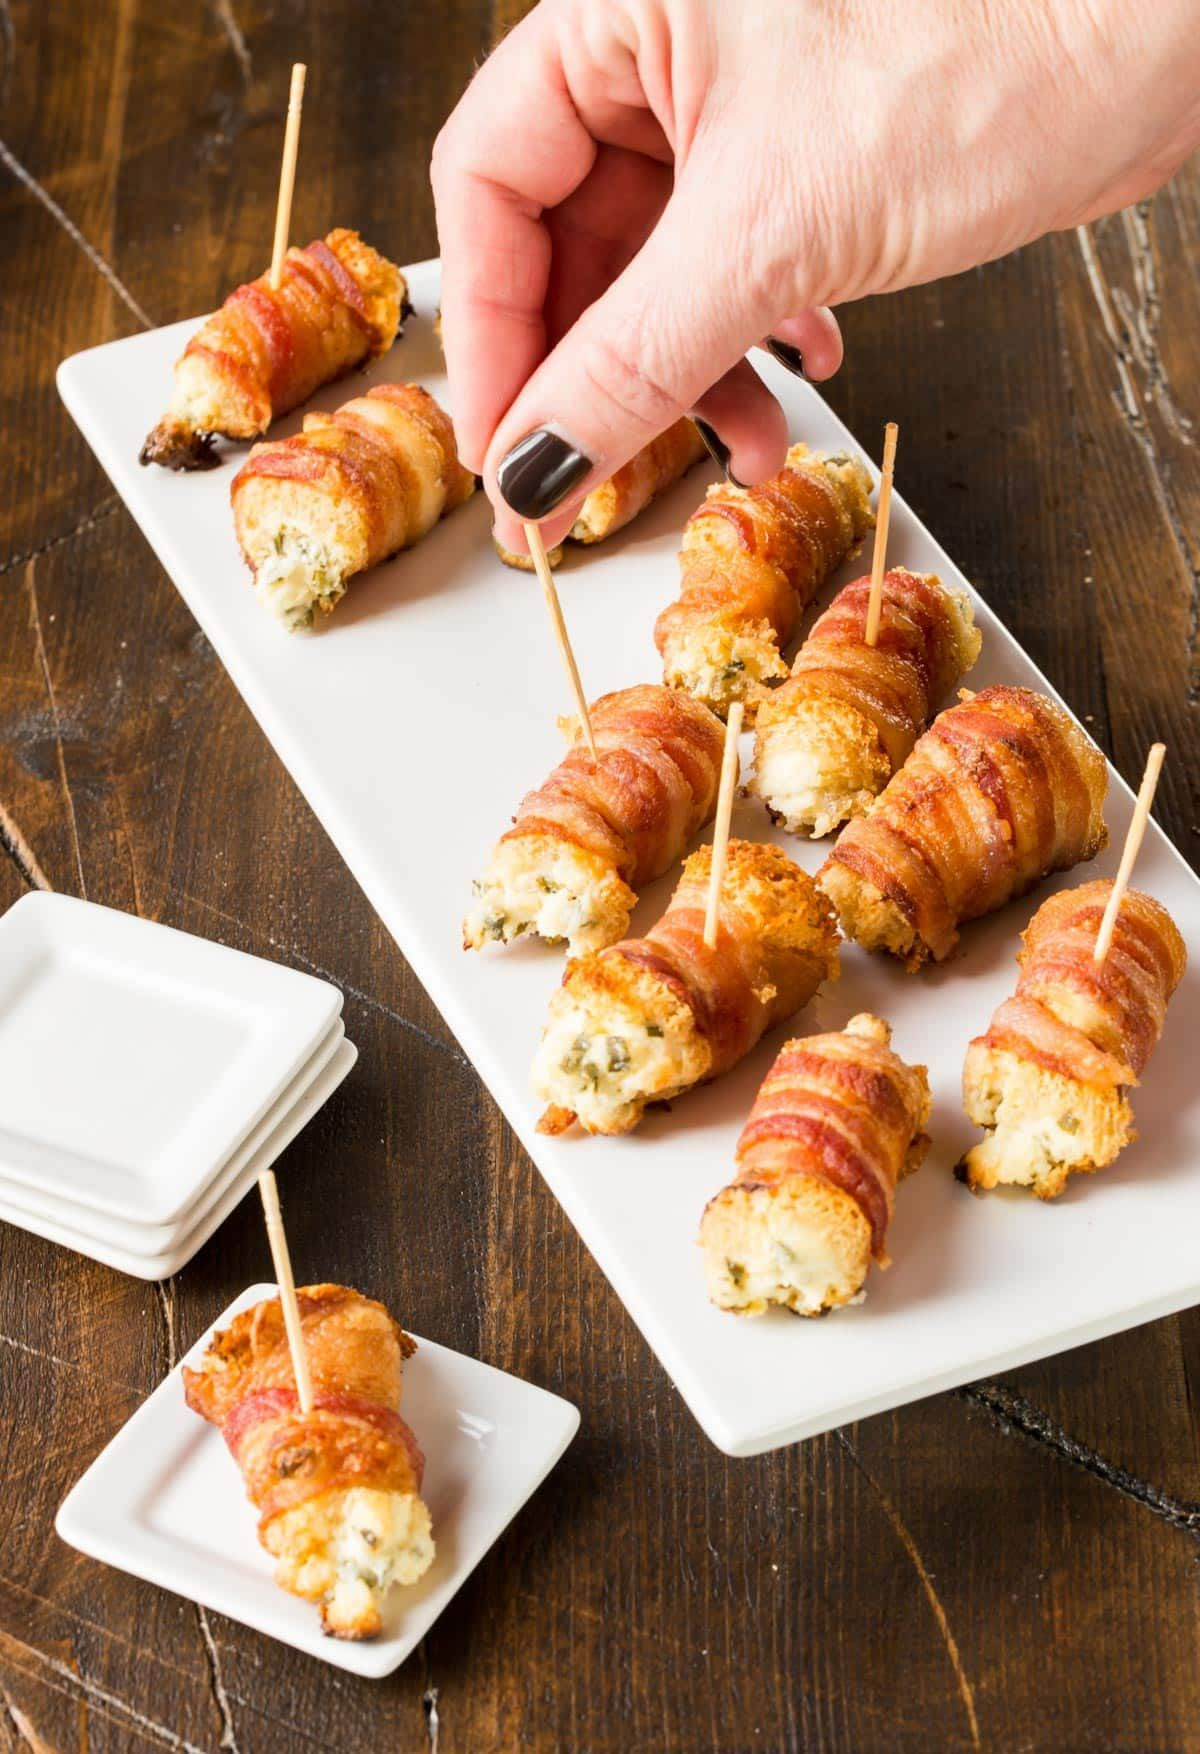 Bacon Wrapped Appetizers Cream Cheese
 Filled with cream cheese and chives these crispy Bacon